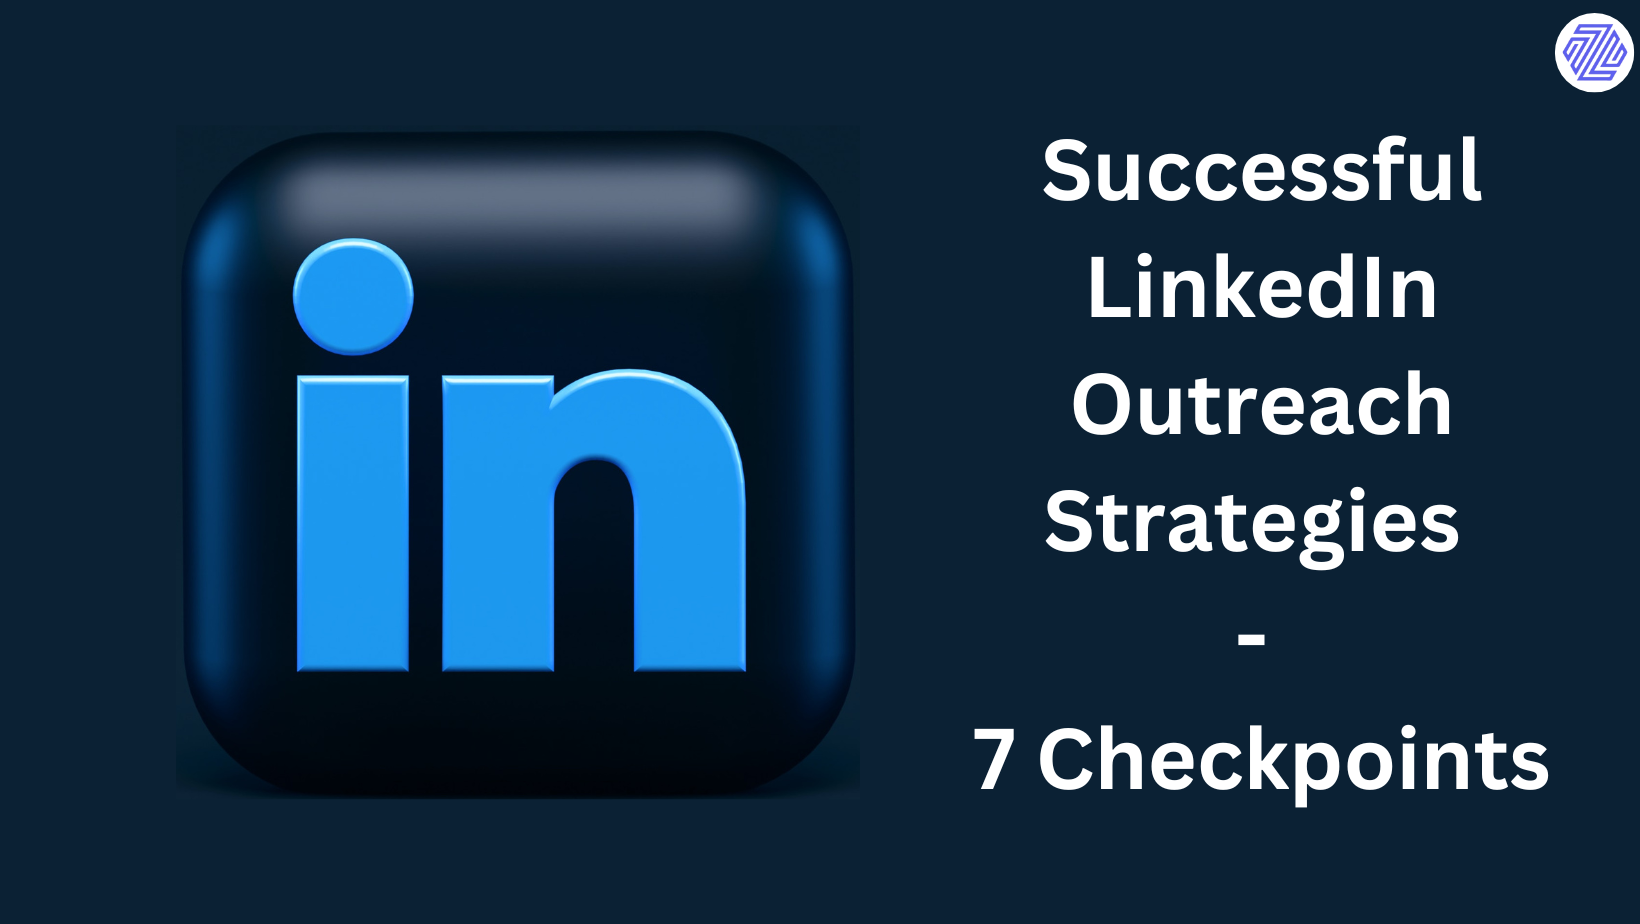 Successful LinkedIn Outreach Strategies - 7 Checkpoints